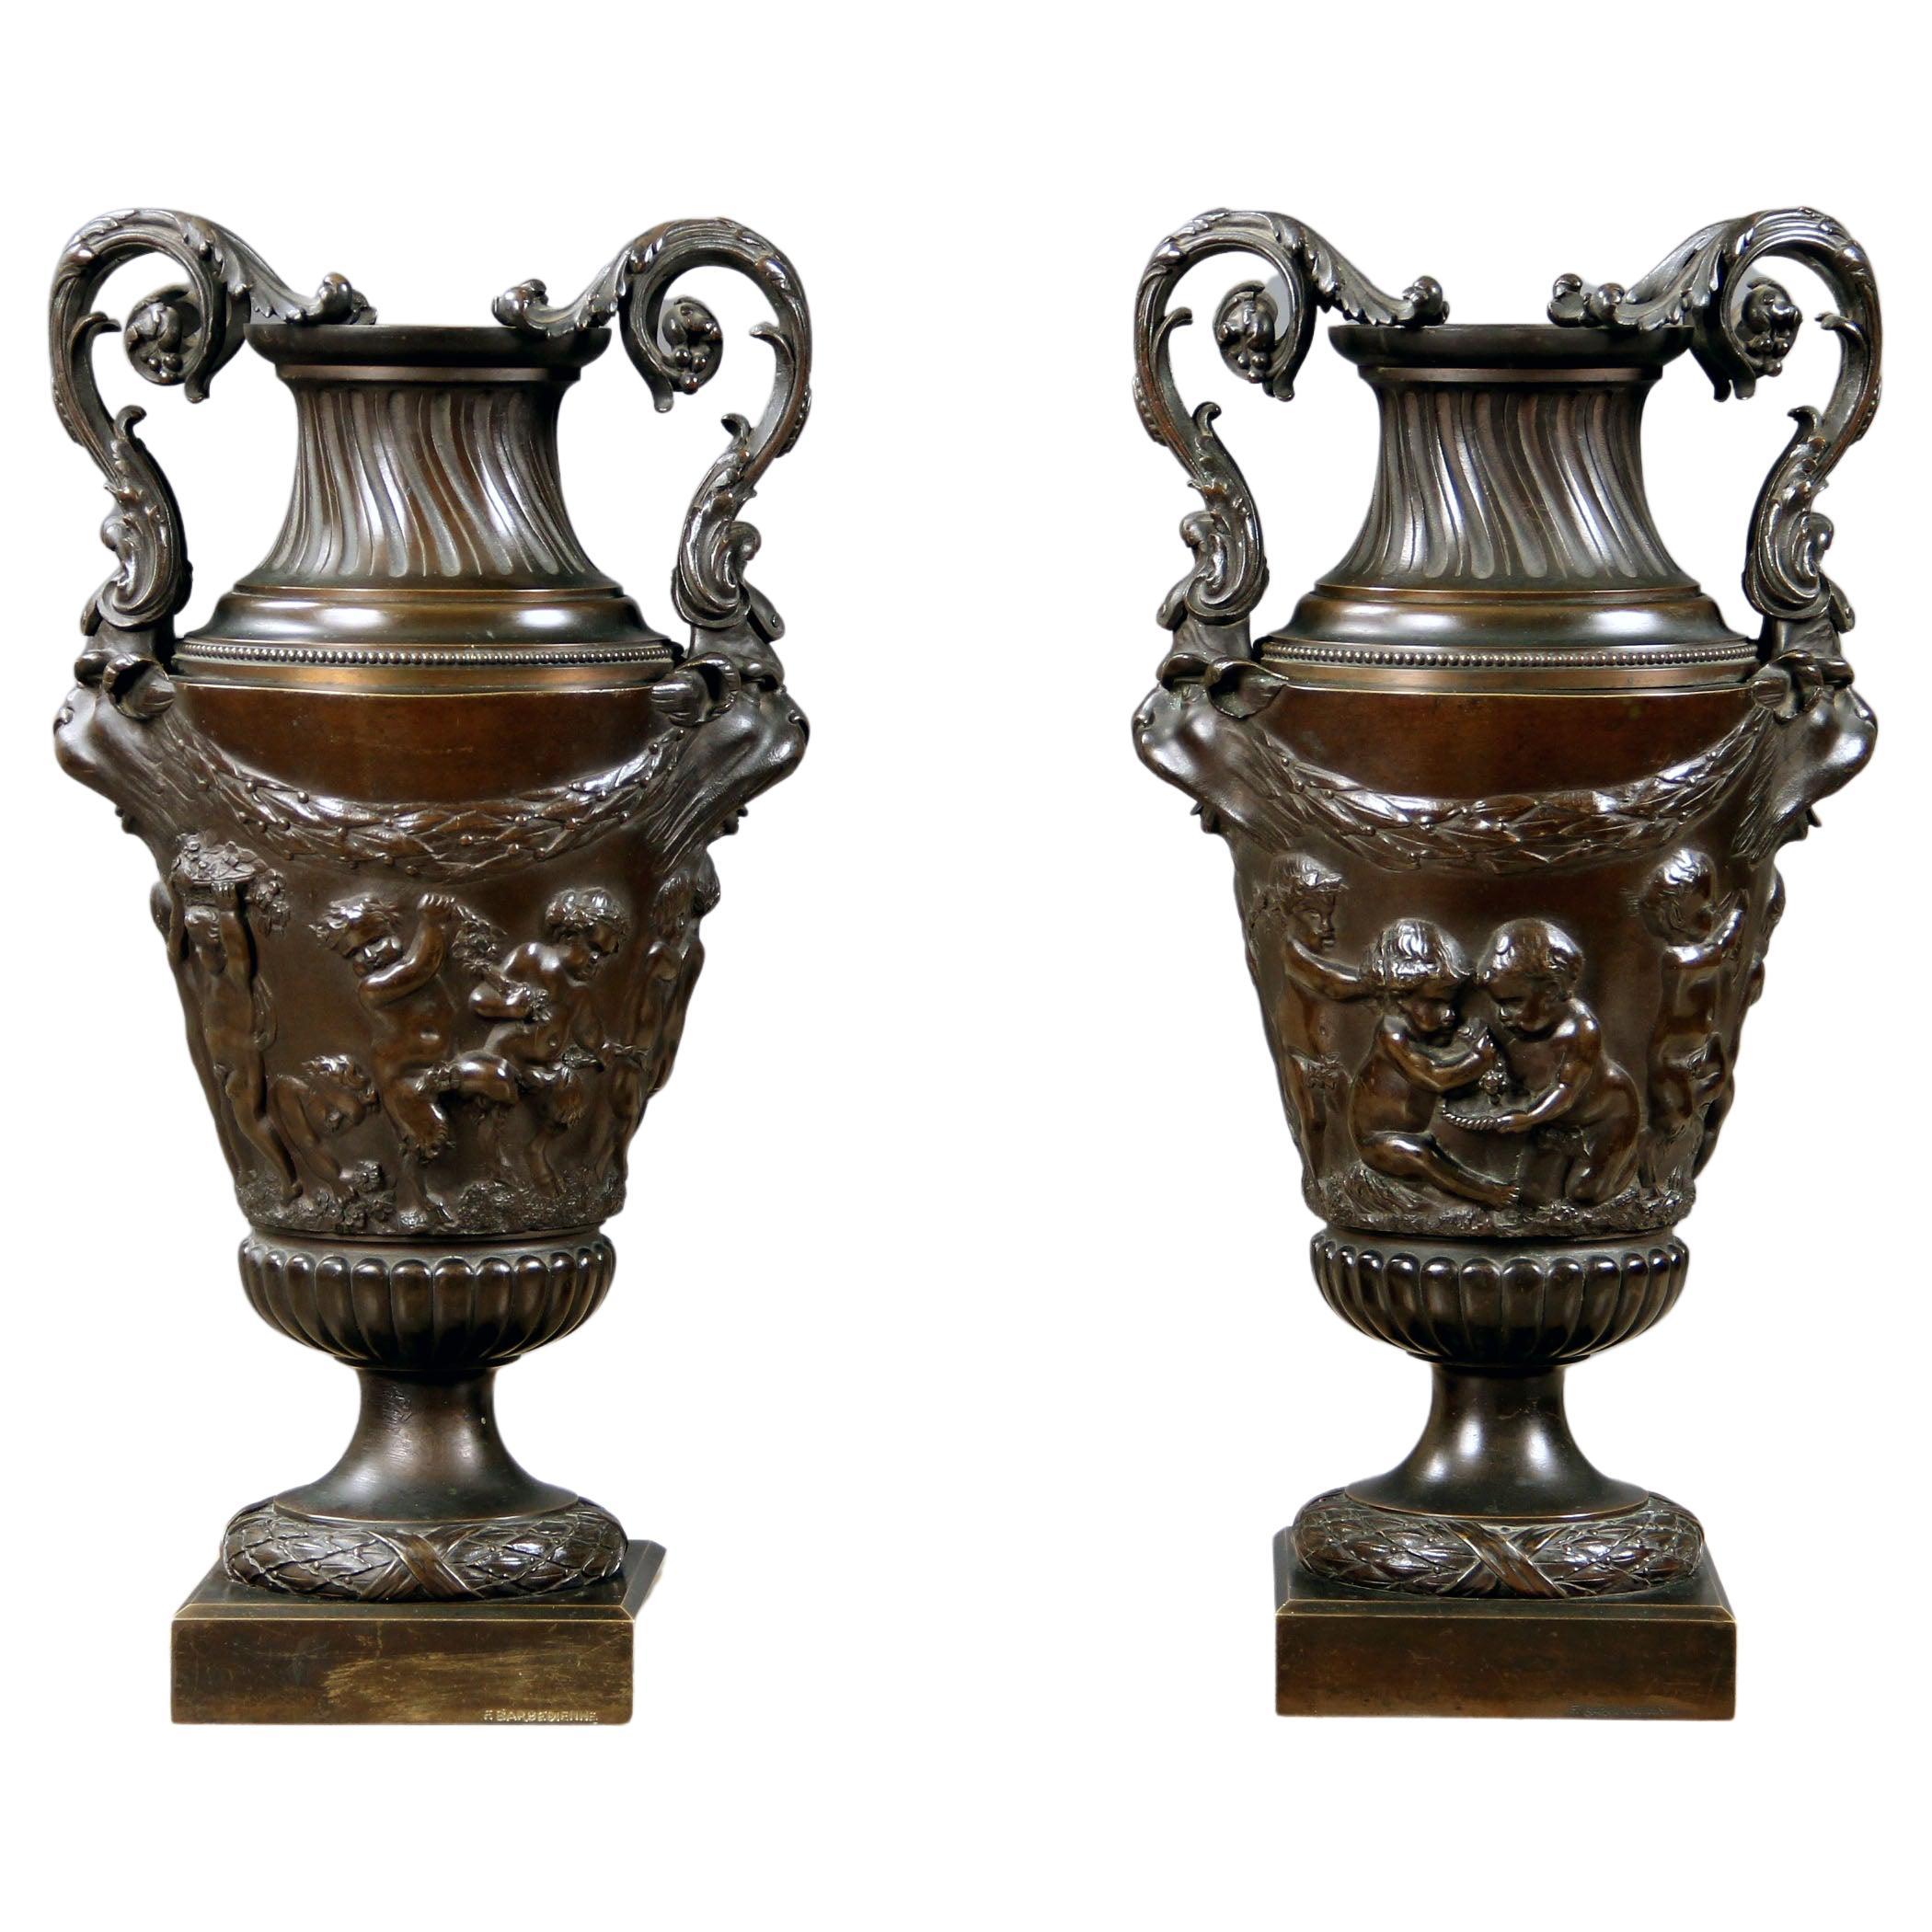 Pair of Late 19th Century Gilt and Patinated Bronze Vases After Clodion For Sale